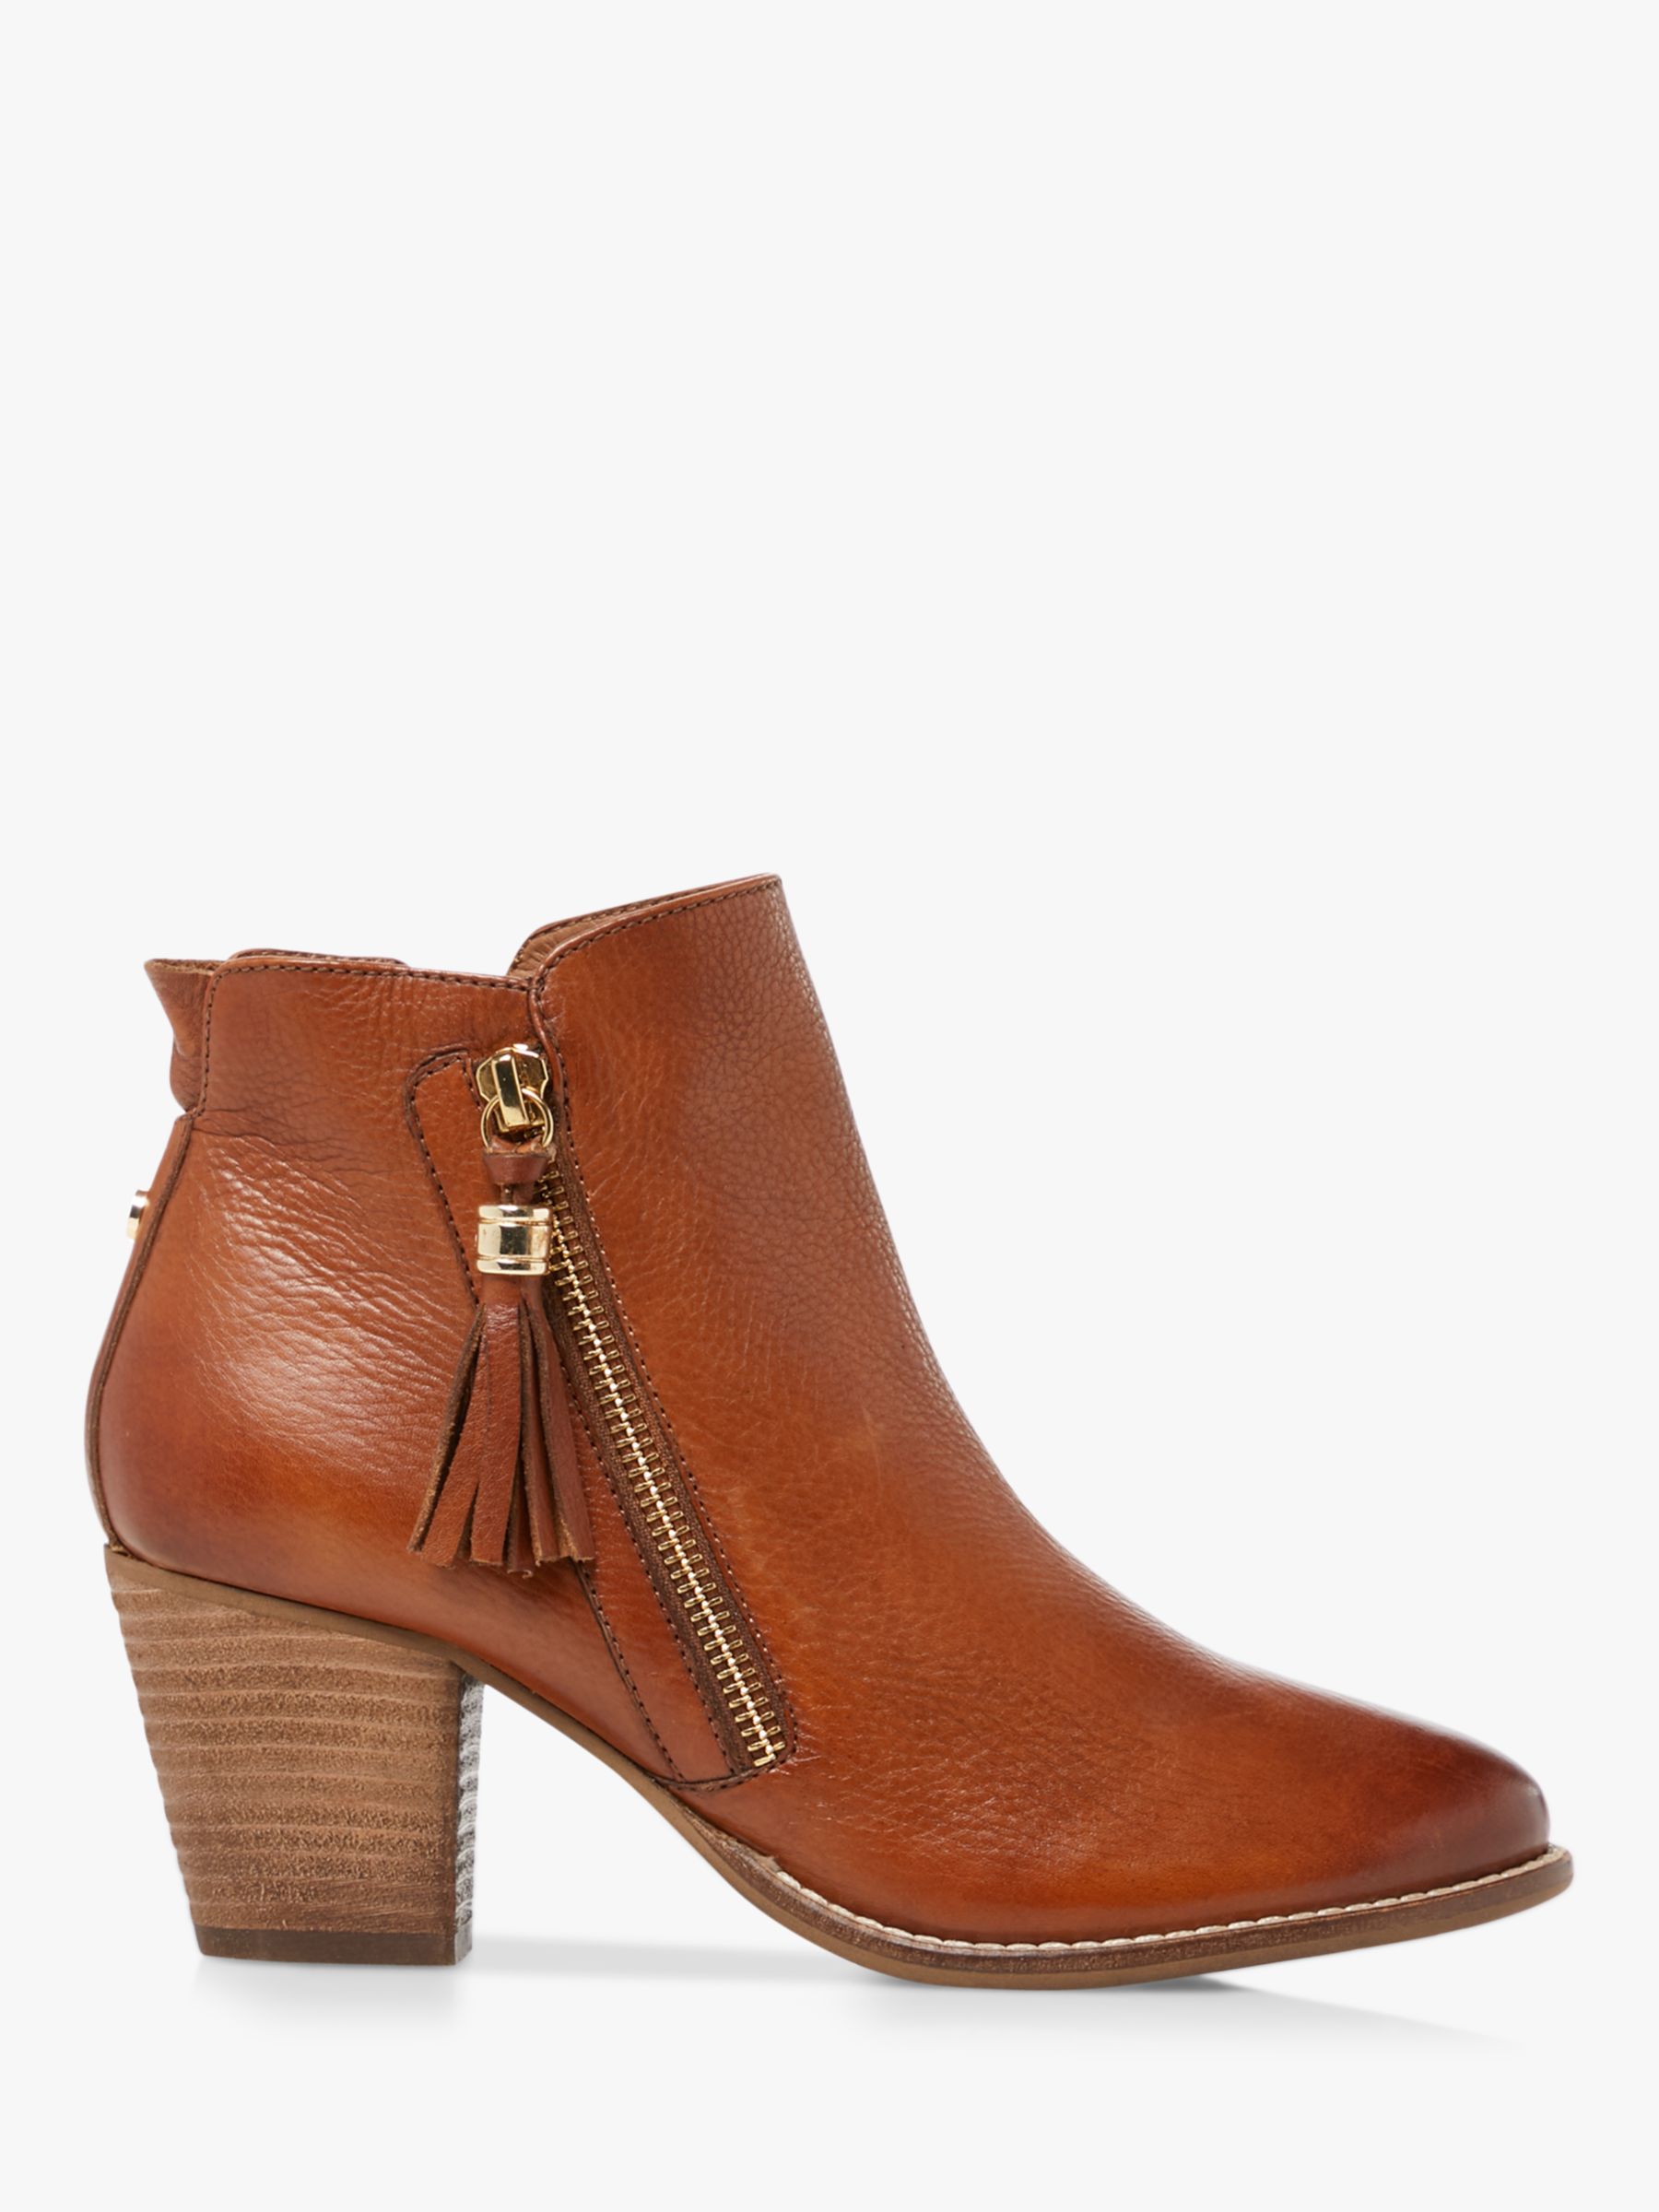 Dune Profound Leather Zip Ankle Boots, Tan at John Lewis & Partners